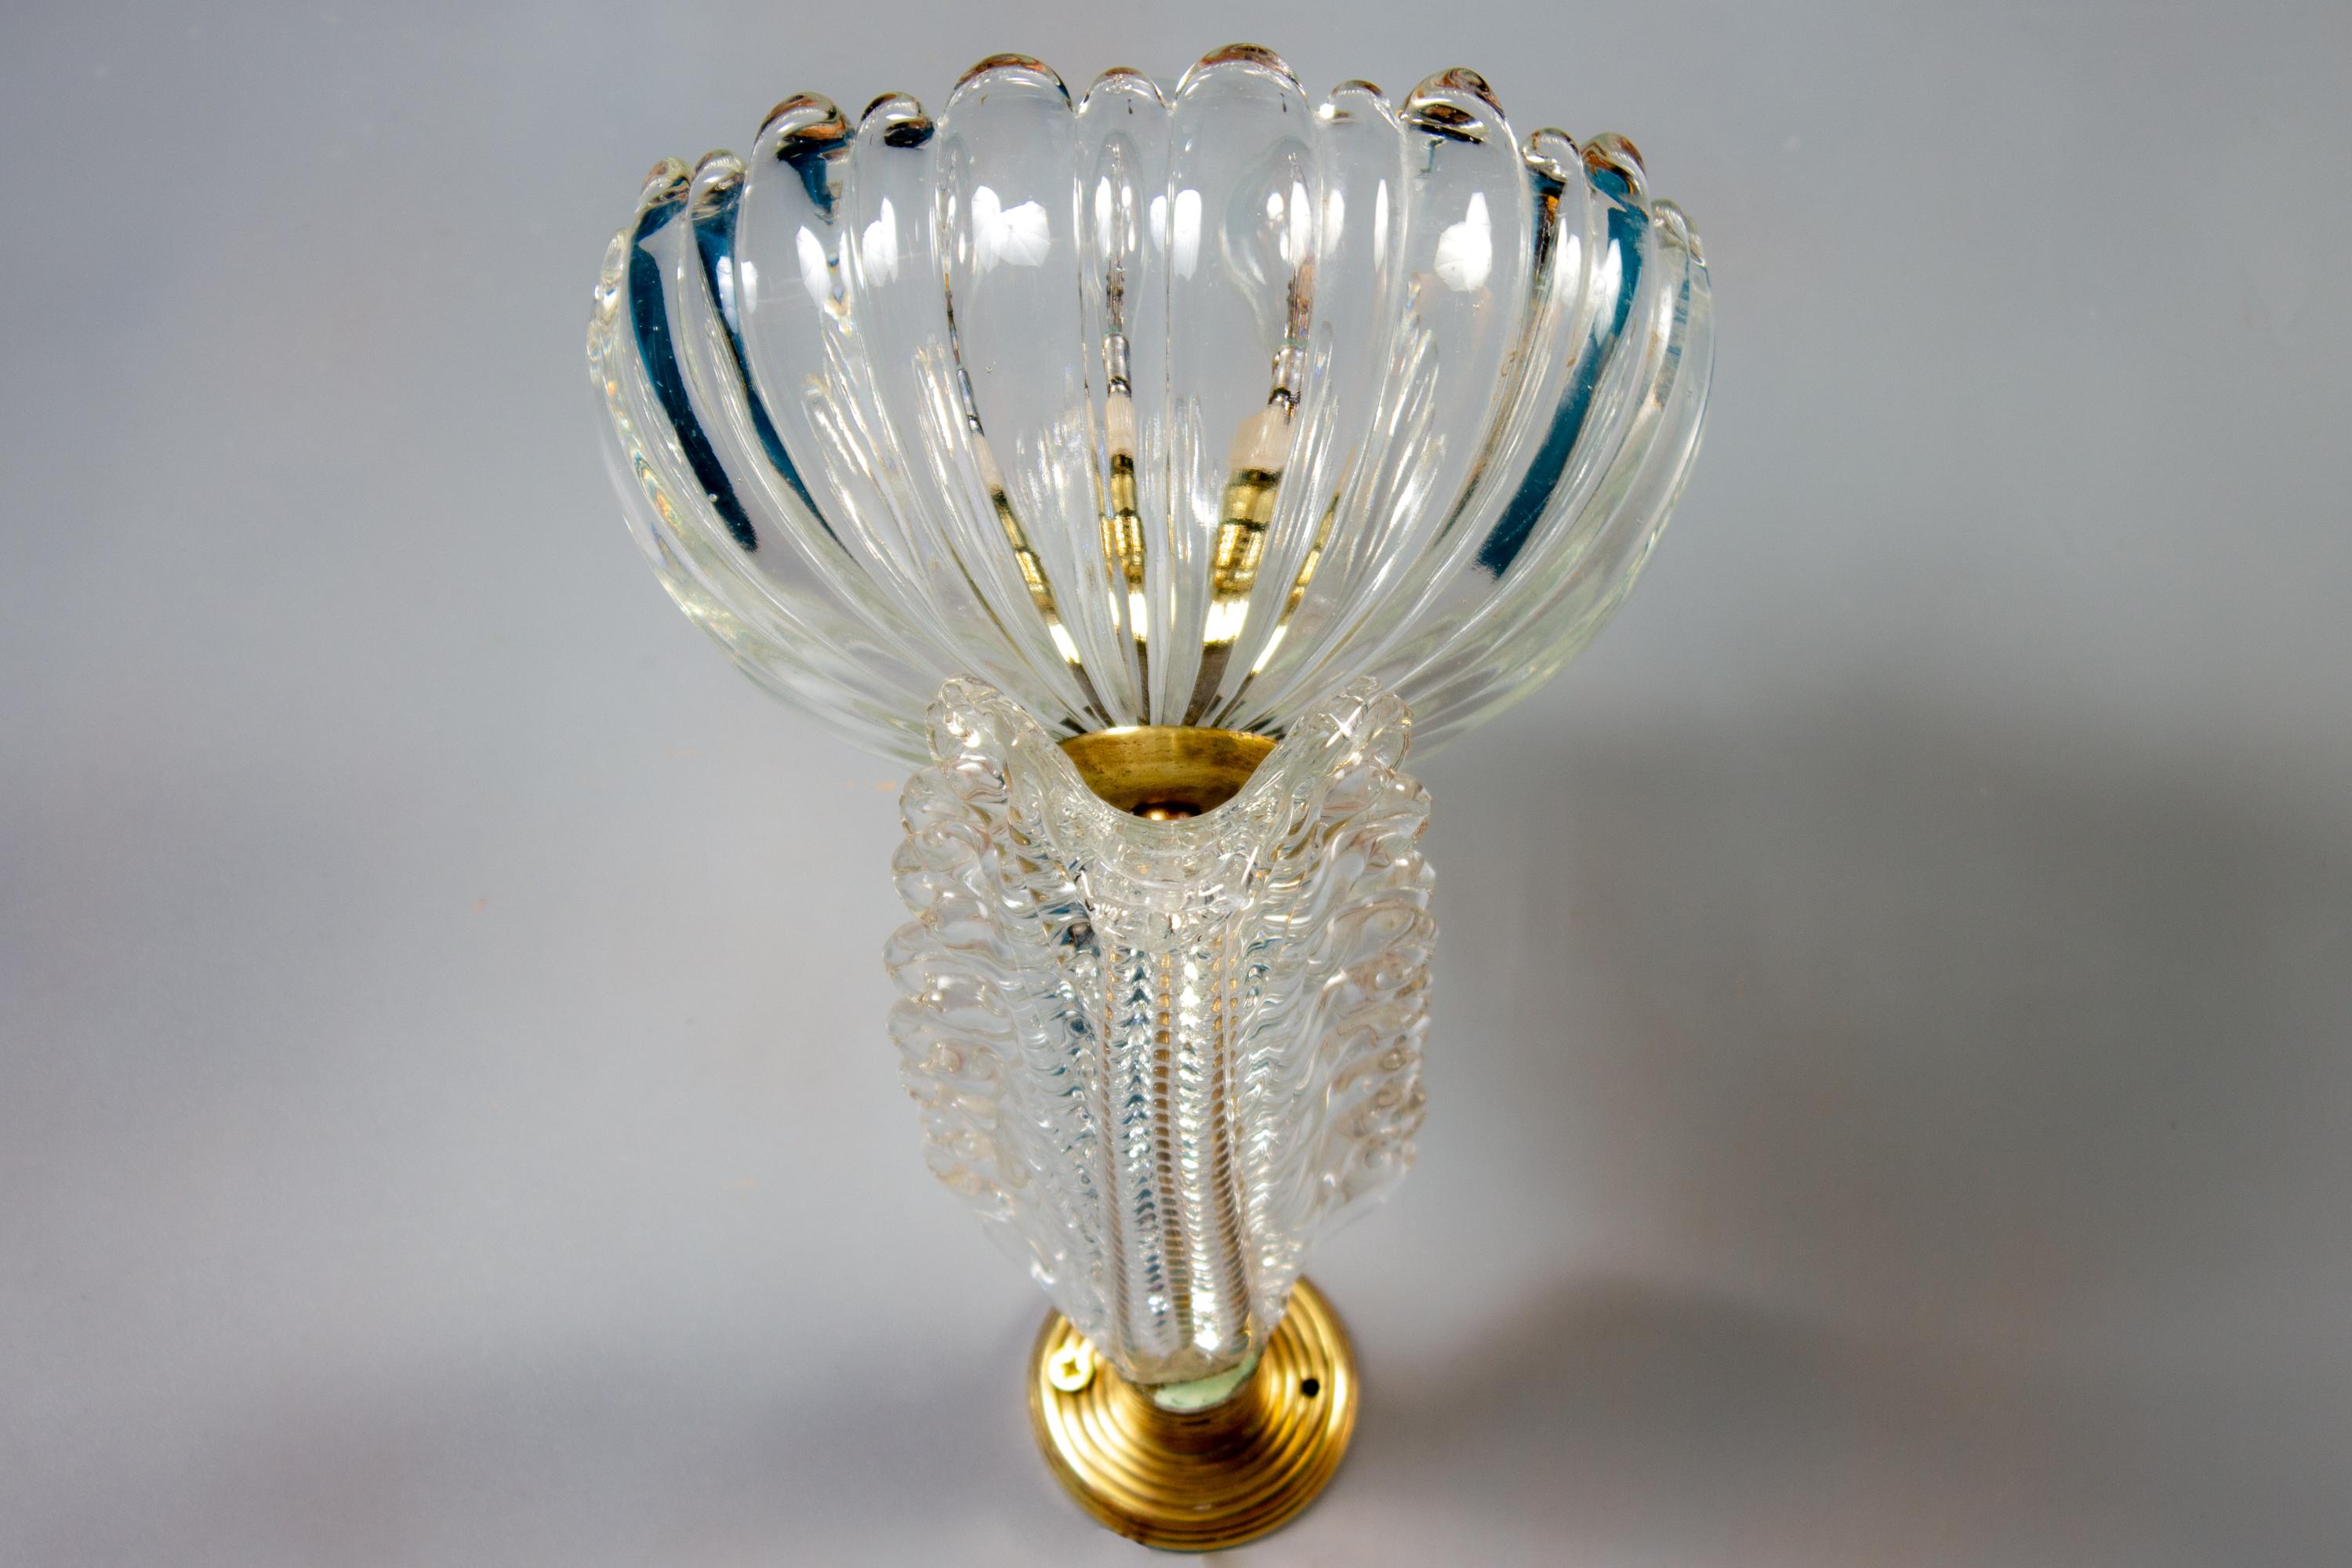 Mid-Century Modern Pair of Barovier Art Deco Brass Mounted Murano Glass Sconces, 1940 For Sale